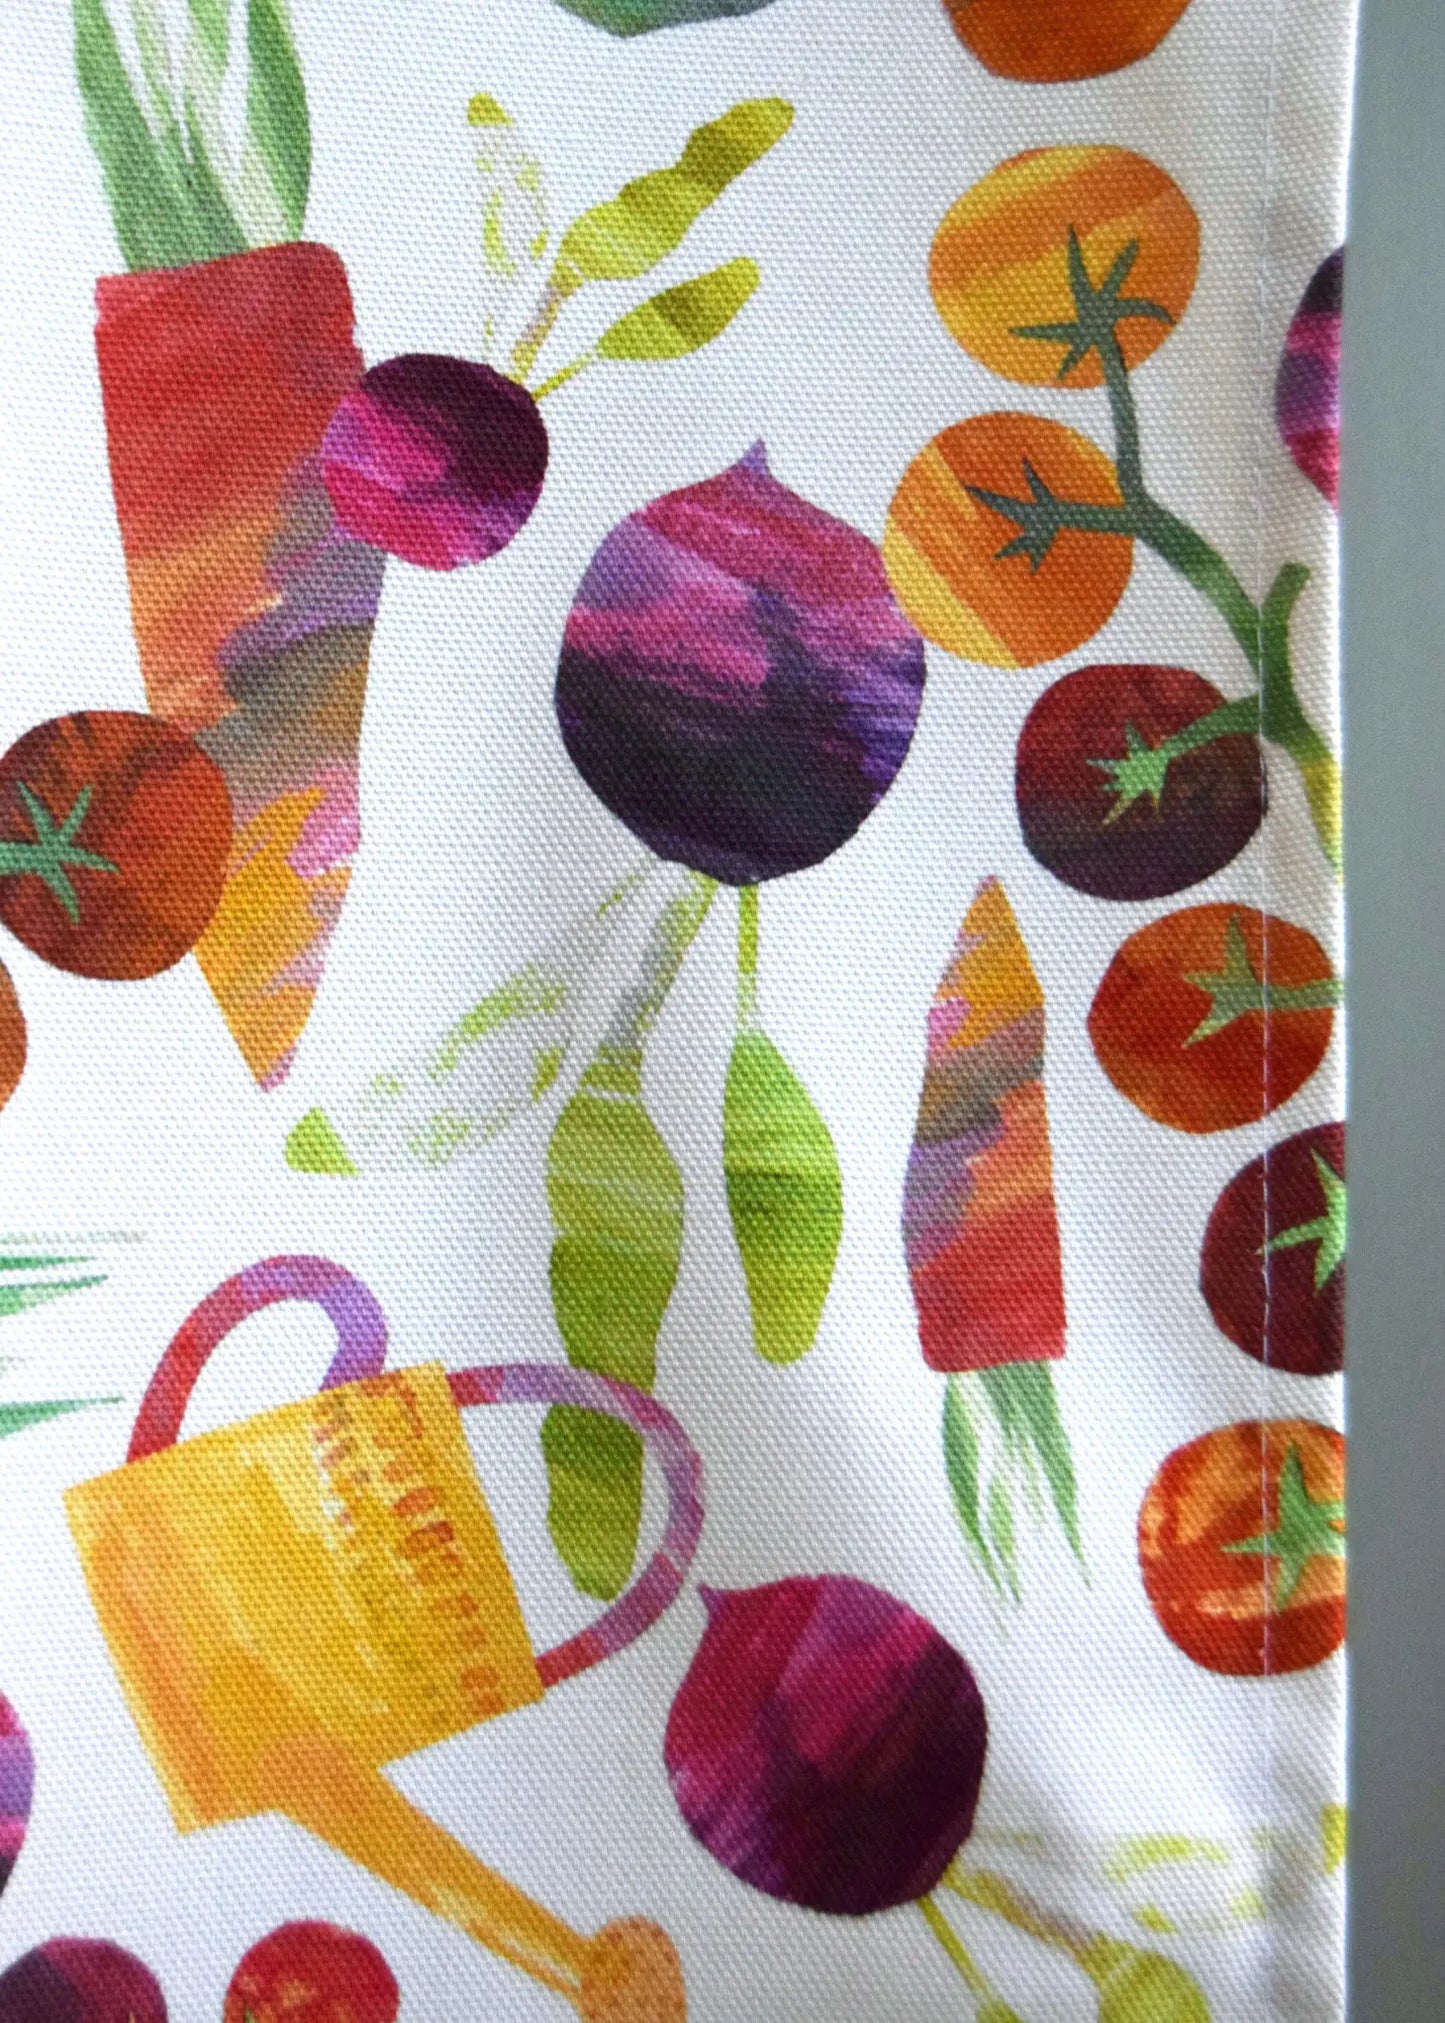 close up of the garden veggies and watering can design 